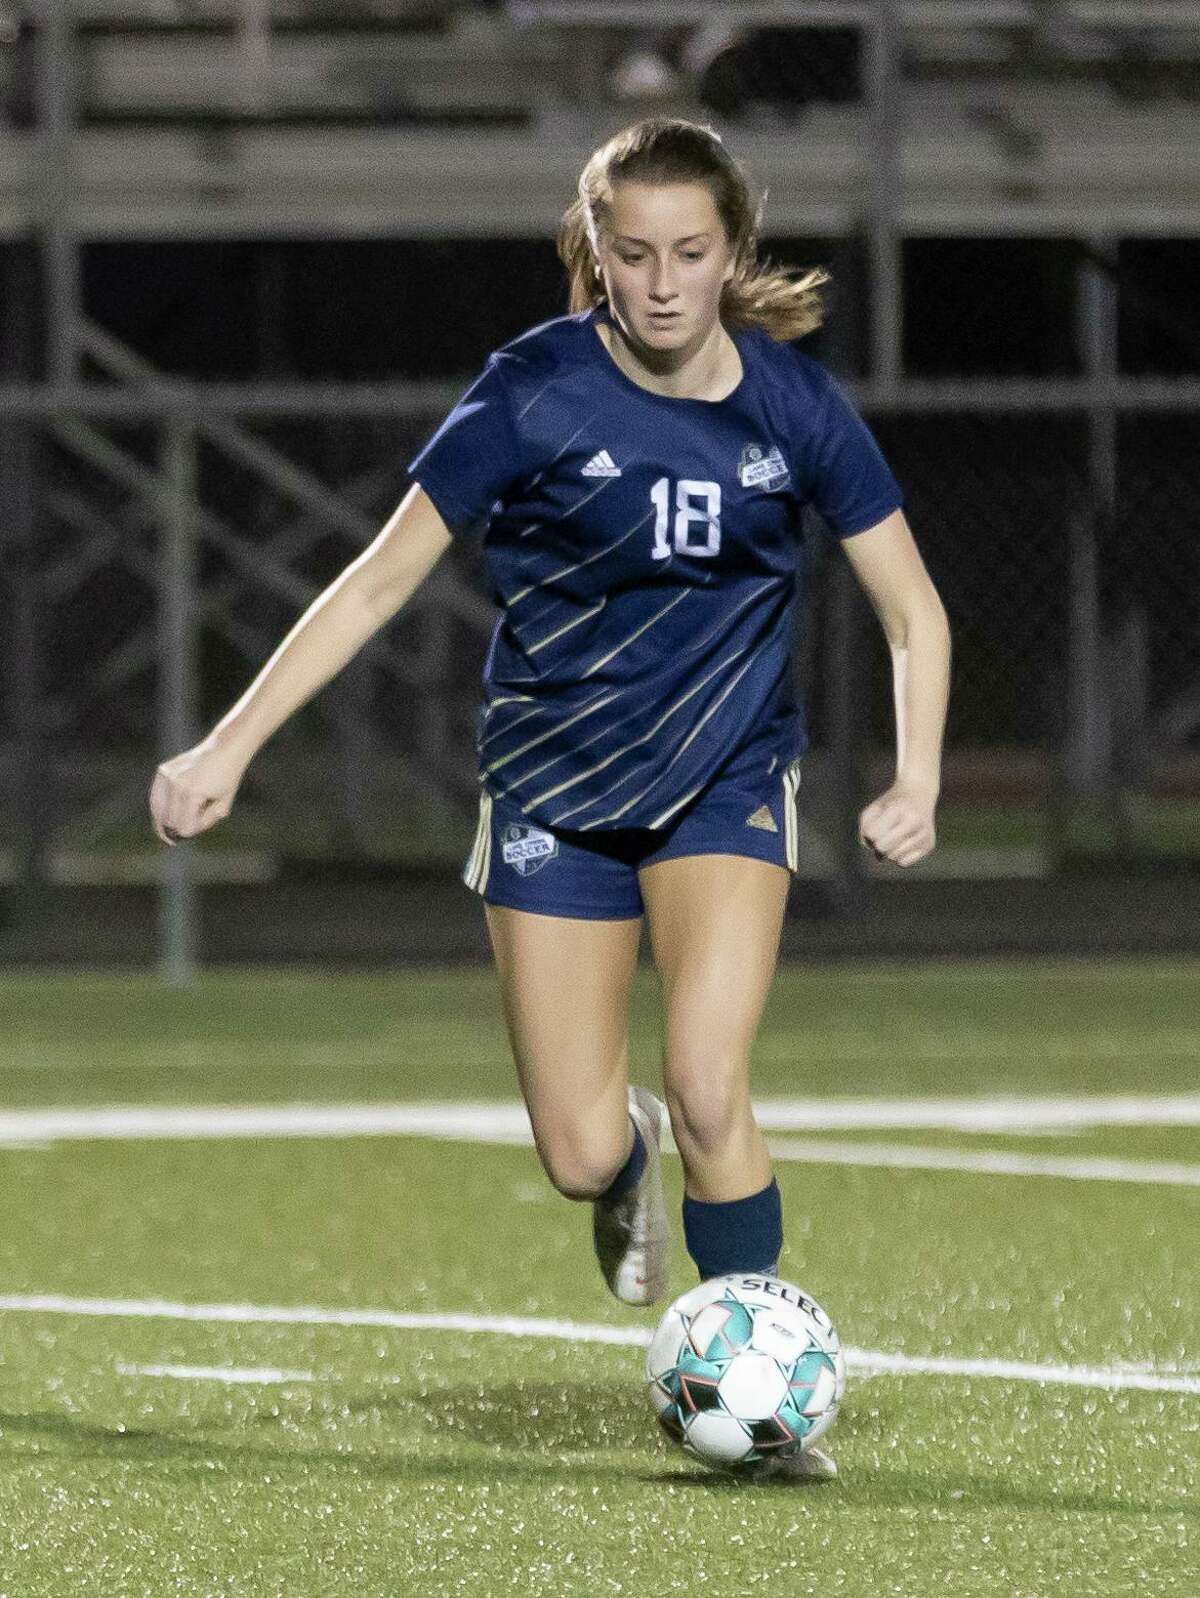 Lake Creek Taylor Hampton (18) drives the ball during the first half of a District 20-5A girls soccer game against Caney Creek at Lake Creek High School, Friday, March 12, 2021, in Montgomery.